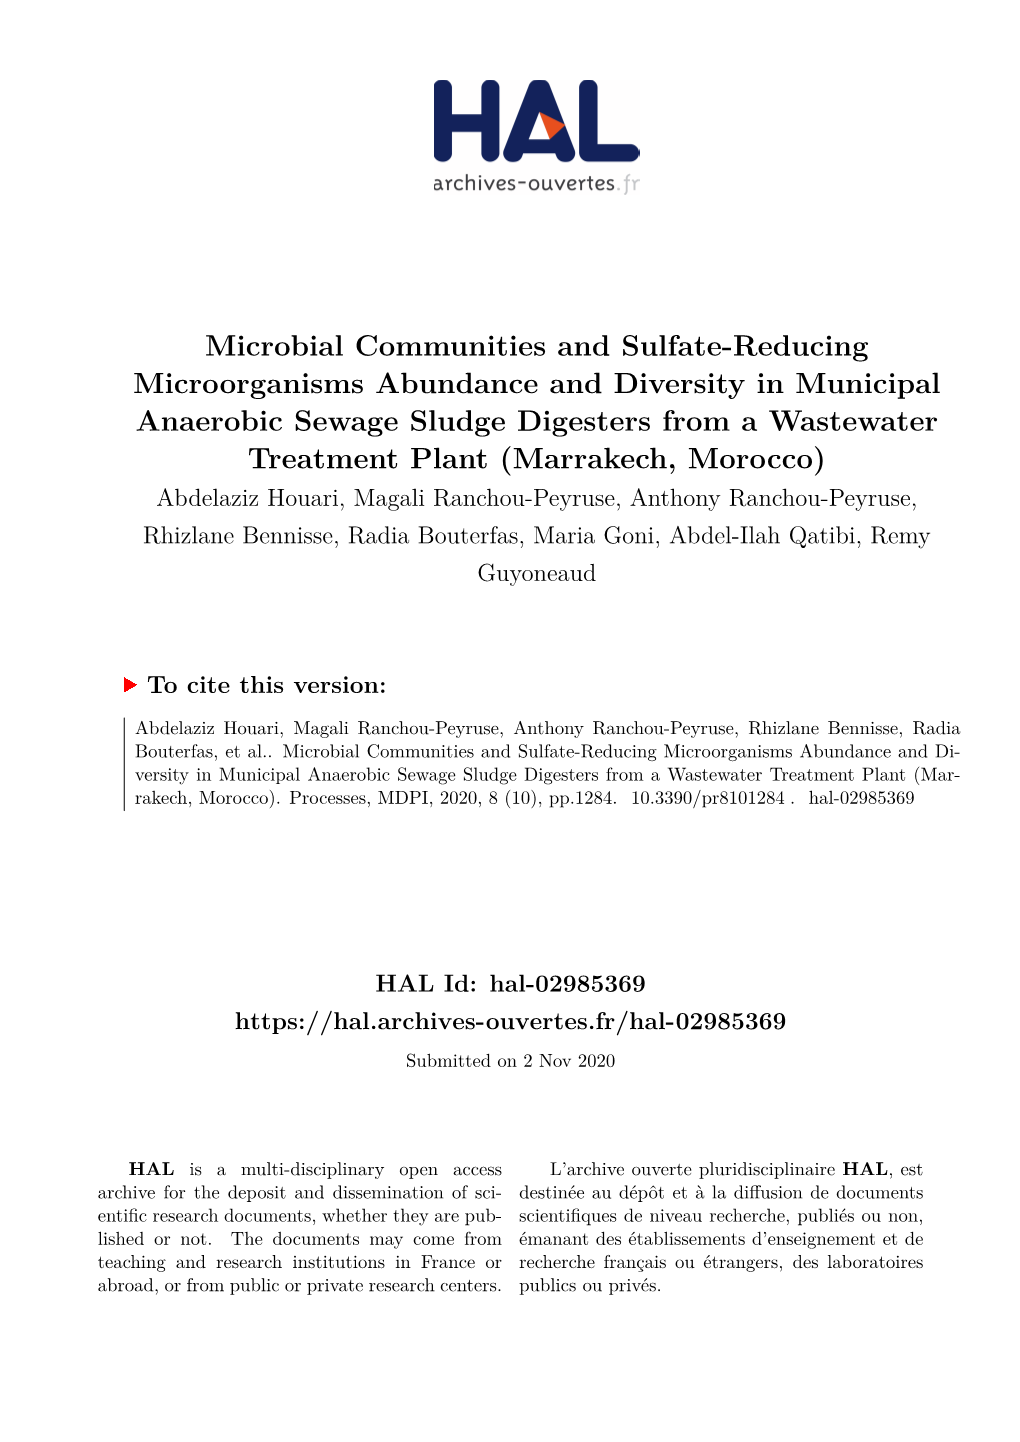 Microbial Communities and Sulfate-Reducing Microorganisms